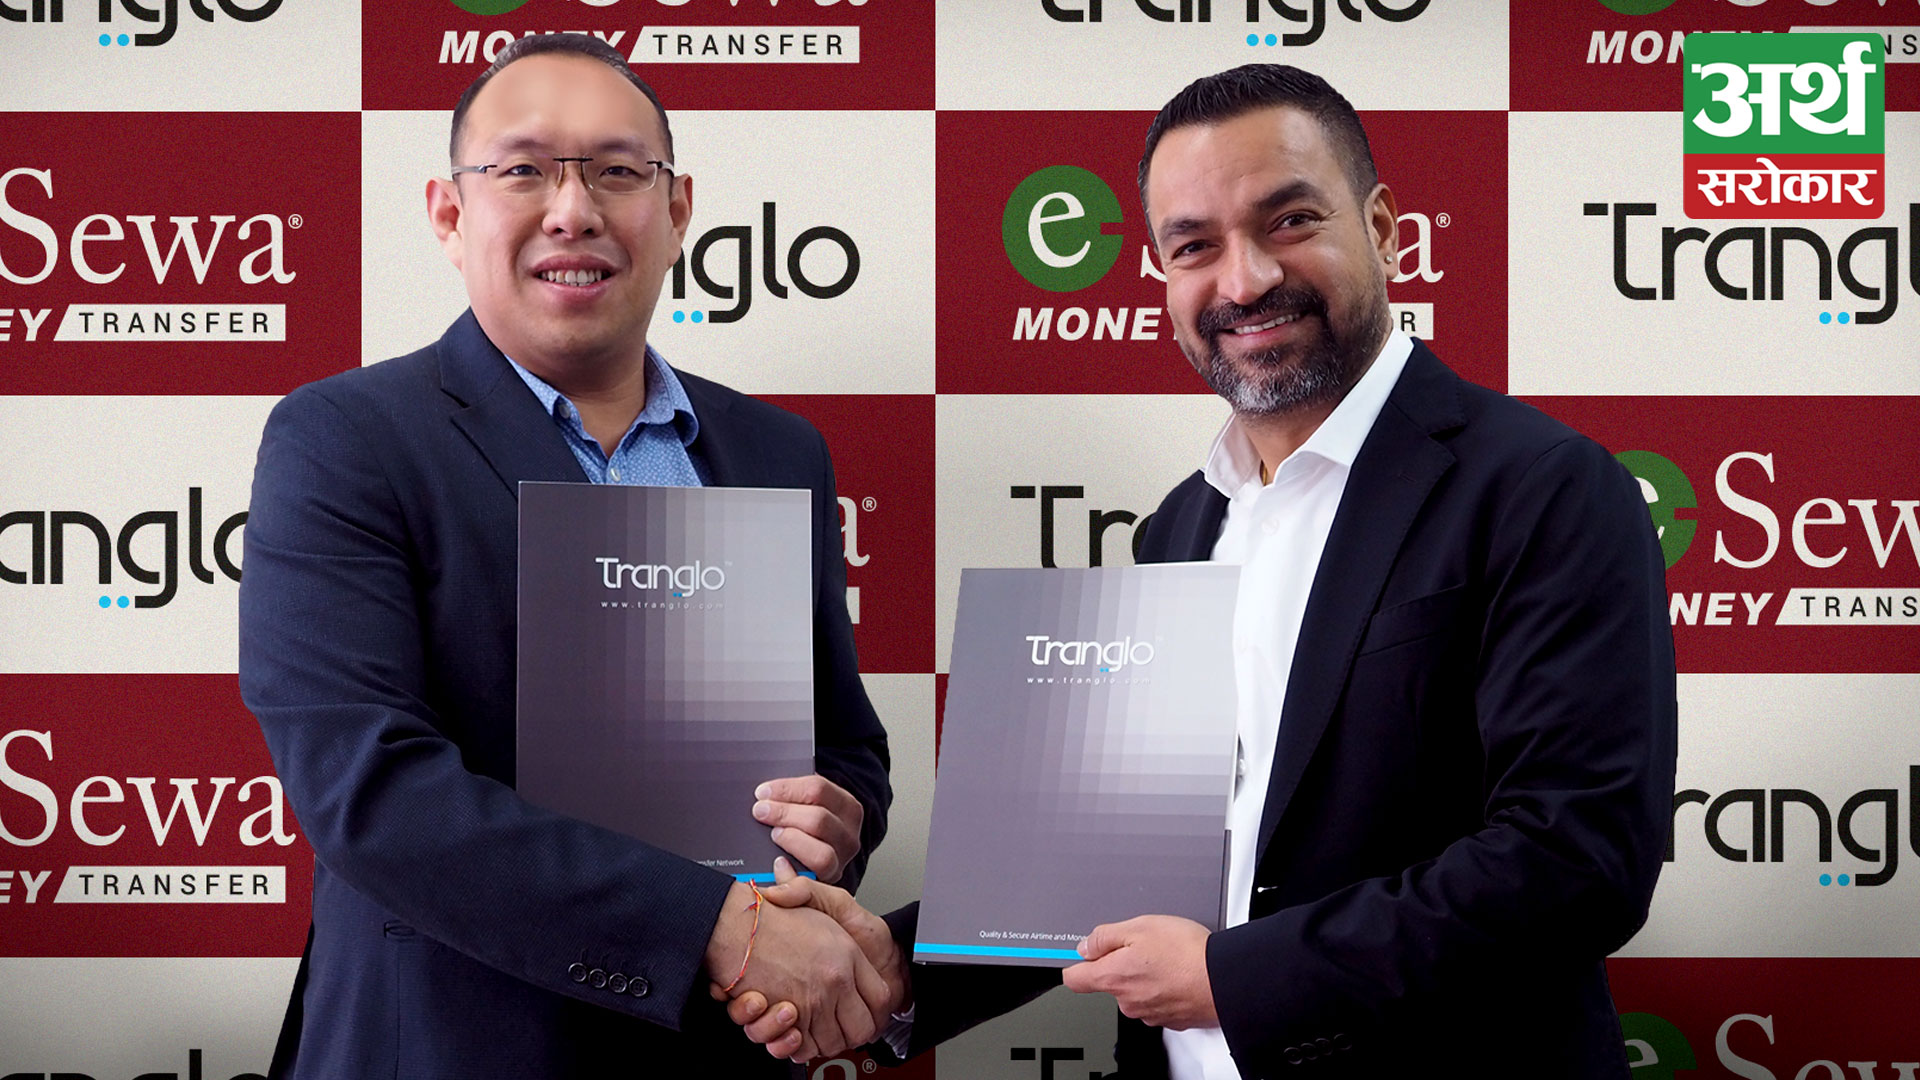 Esewa Money Transfer partners with Tranglo to facilitate remittance services.